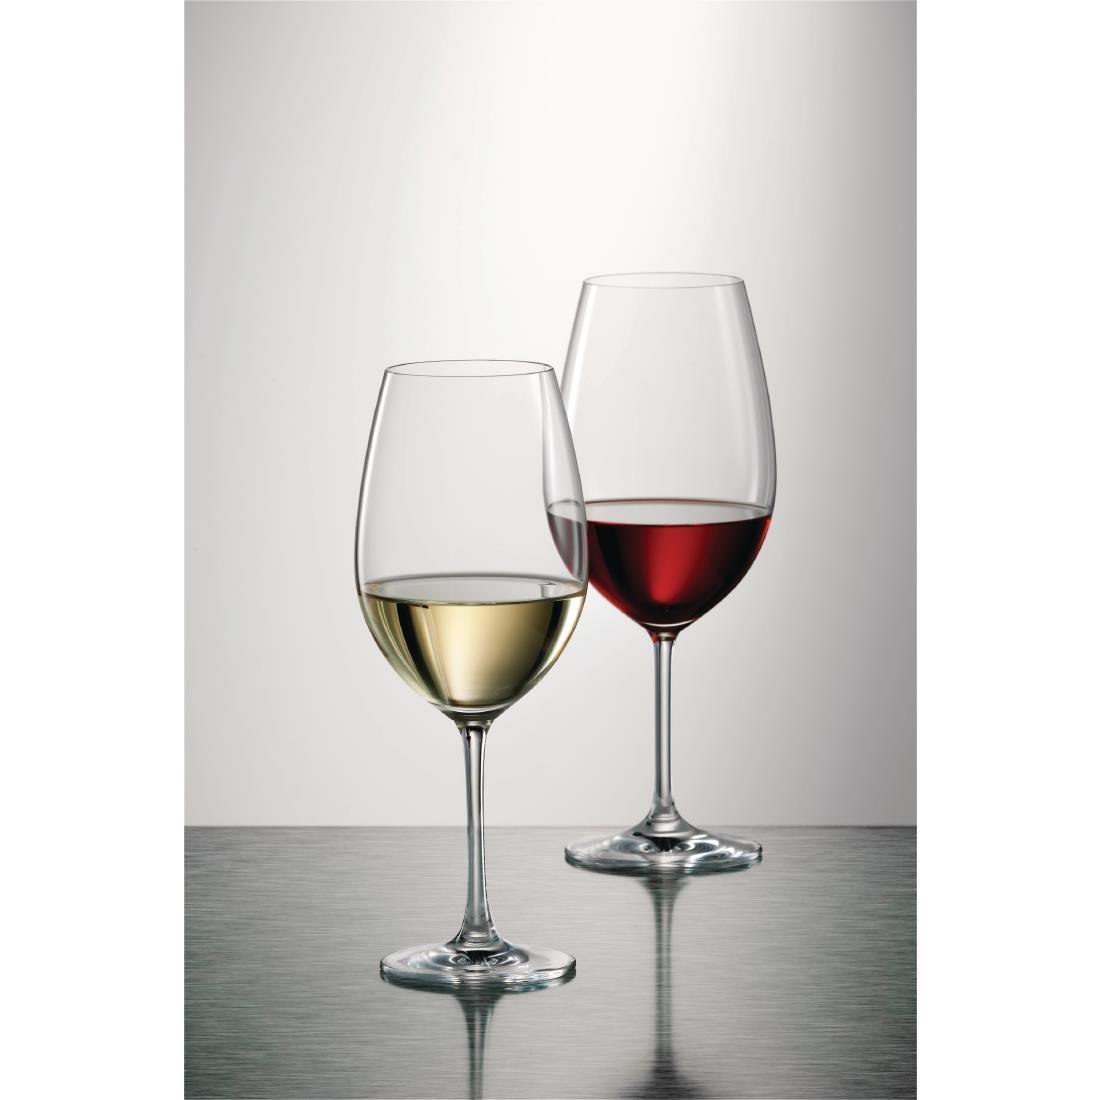 Schott Zwiesel Ivento Red Wine Glasses 480ml (Pack of 6) - GL135  - 2